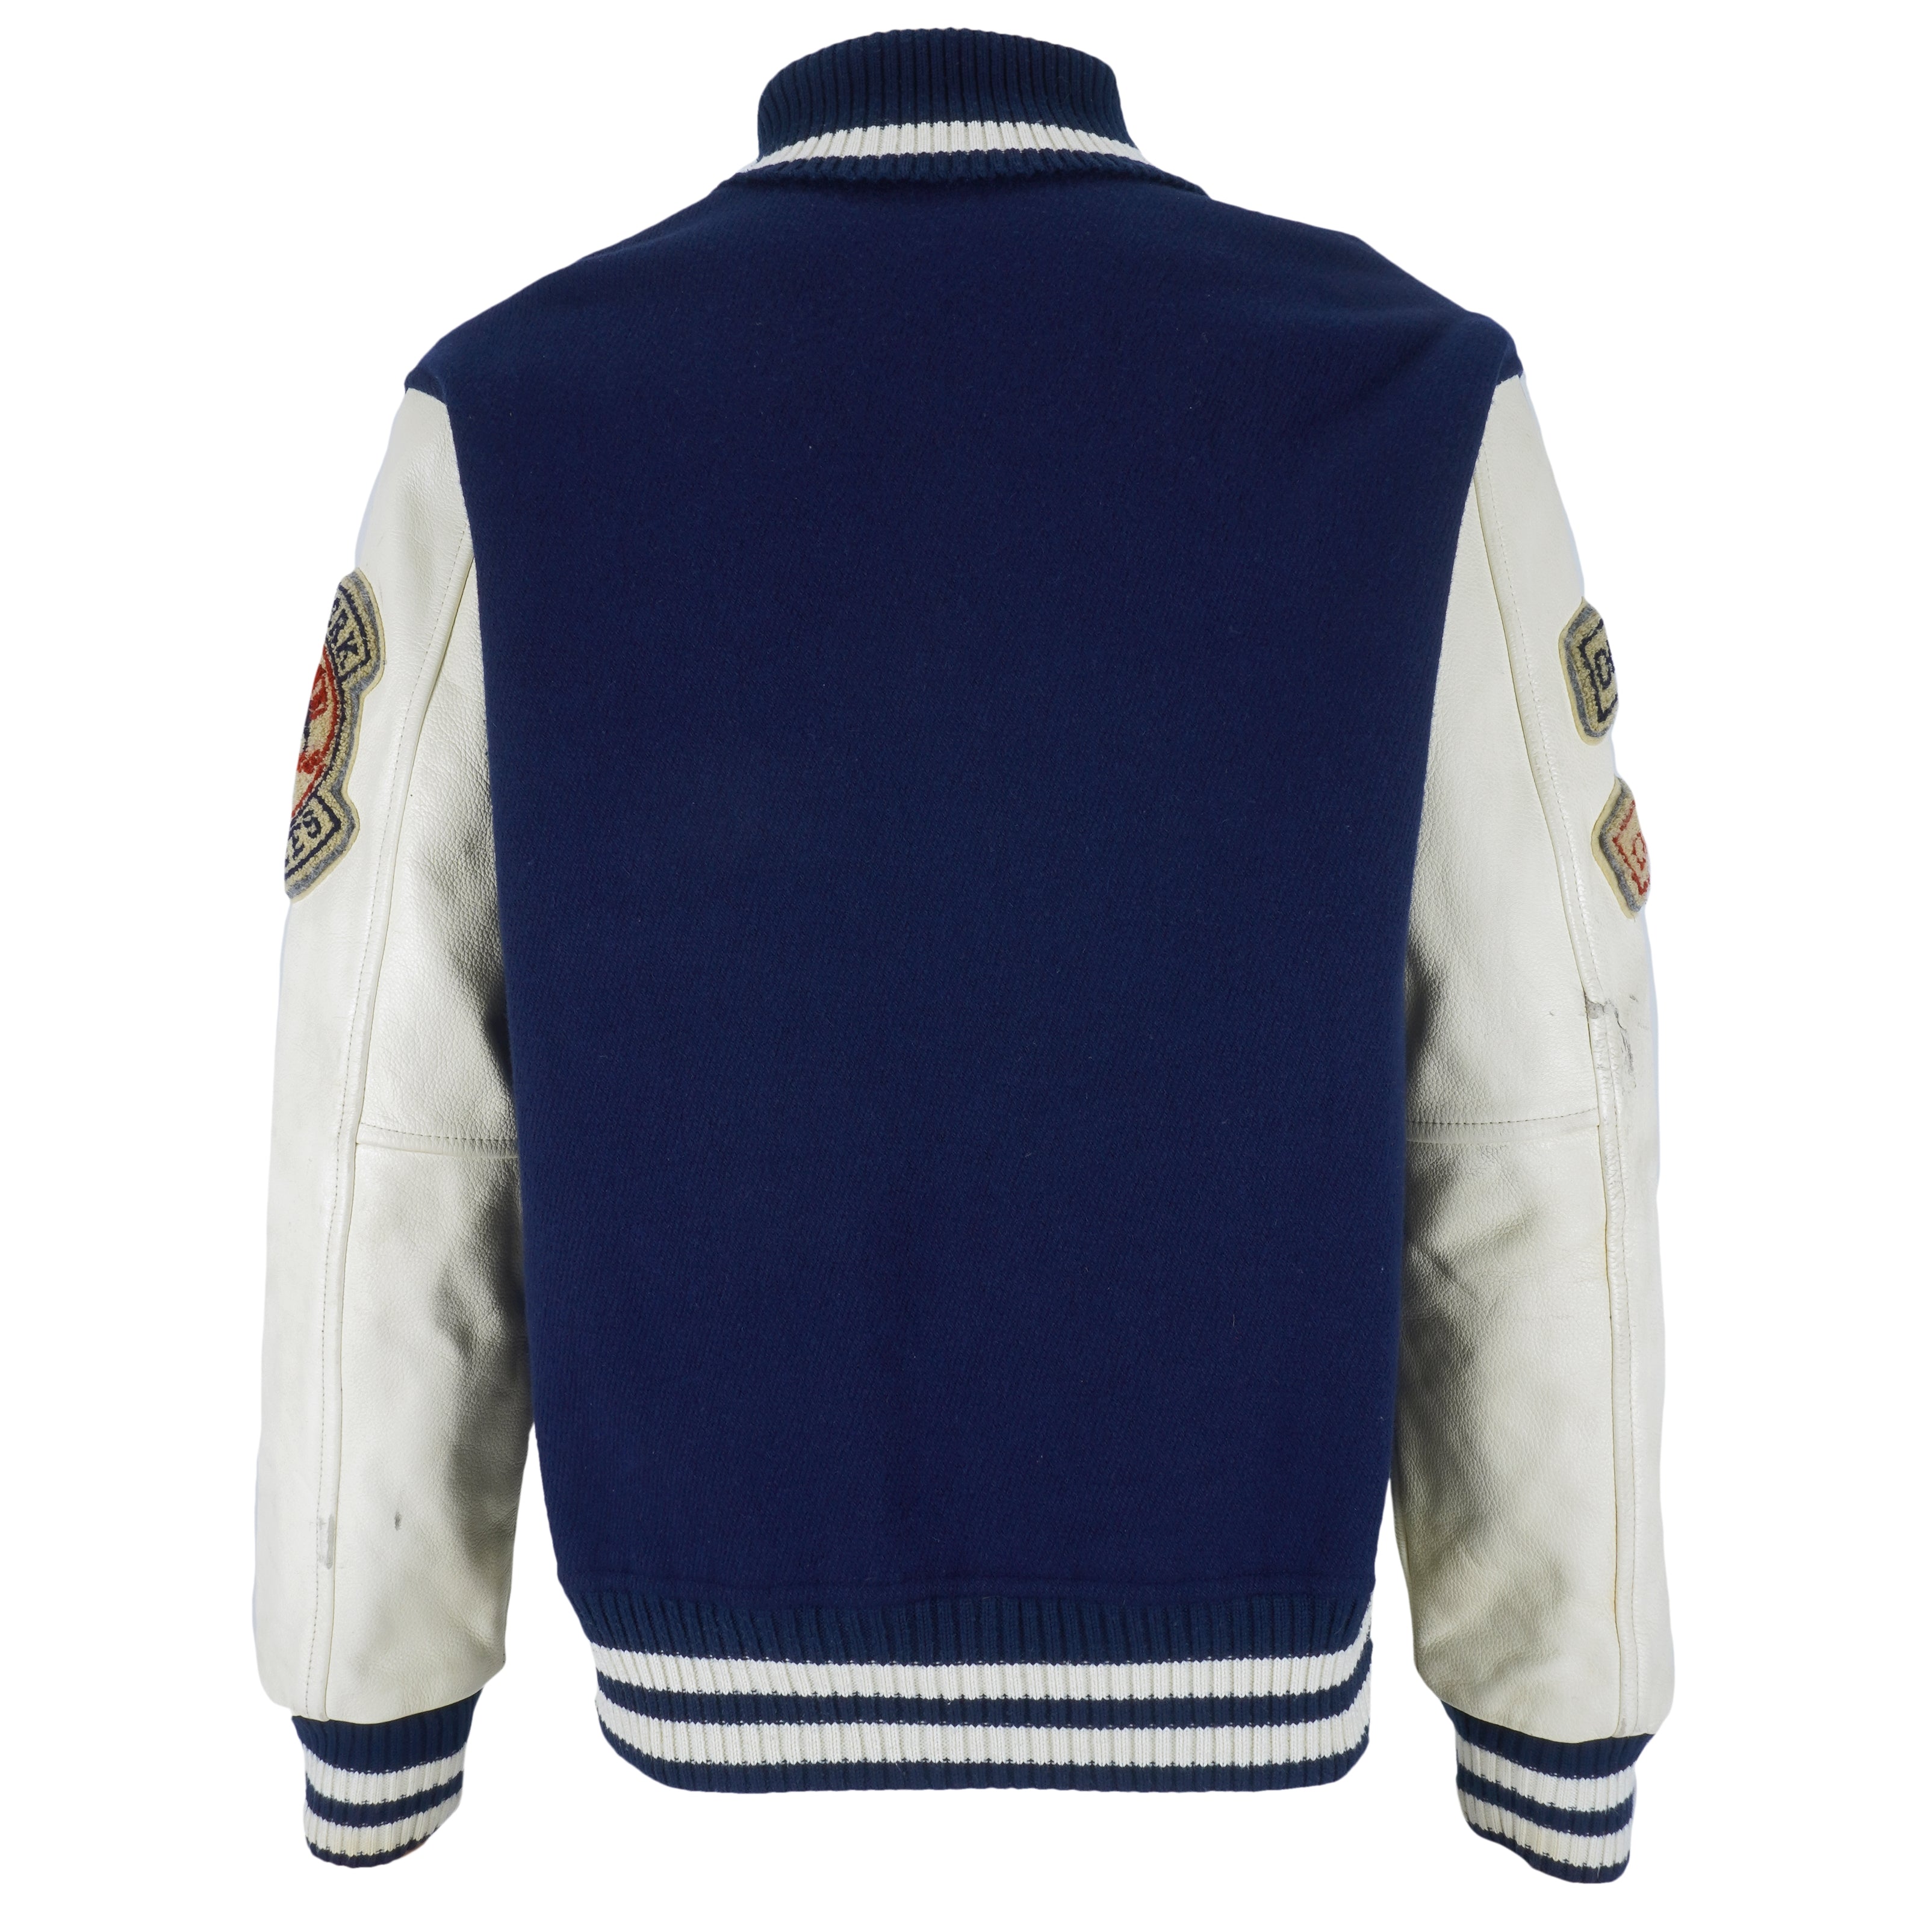 New York Yankees Two-Tone Wool and Leather Jacket - Navy Medium